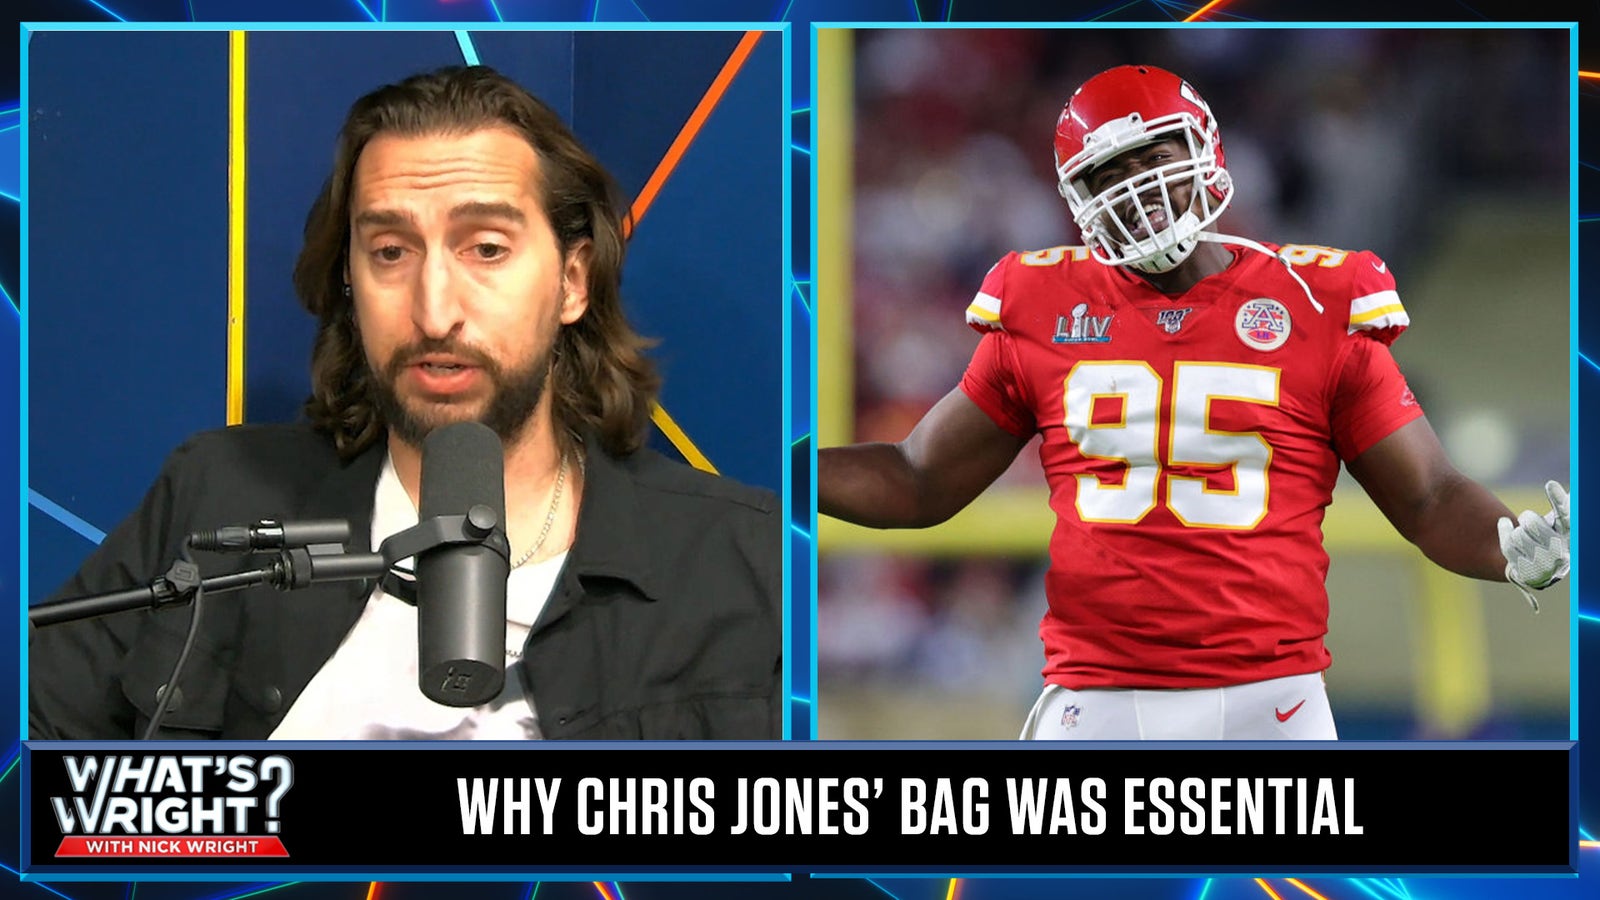 Re-signing Chris Jones was essential to continuing the Chiefs dynasty